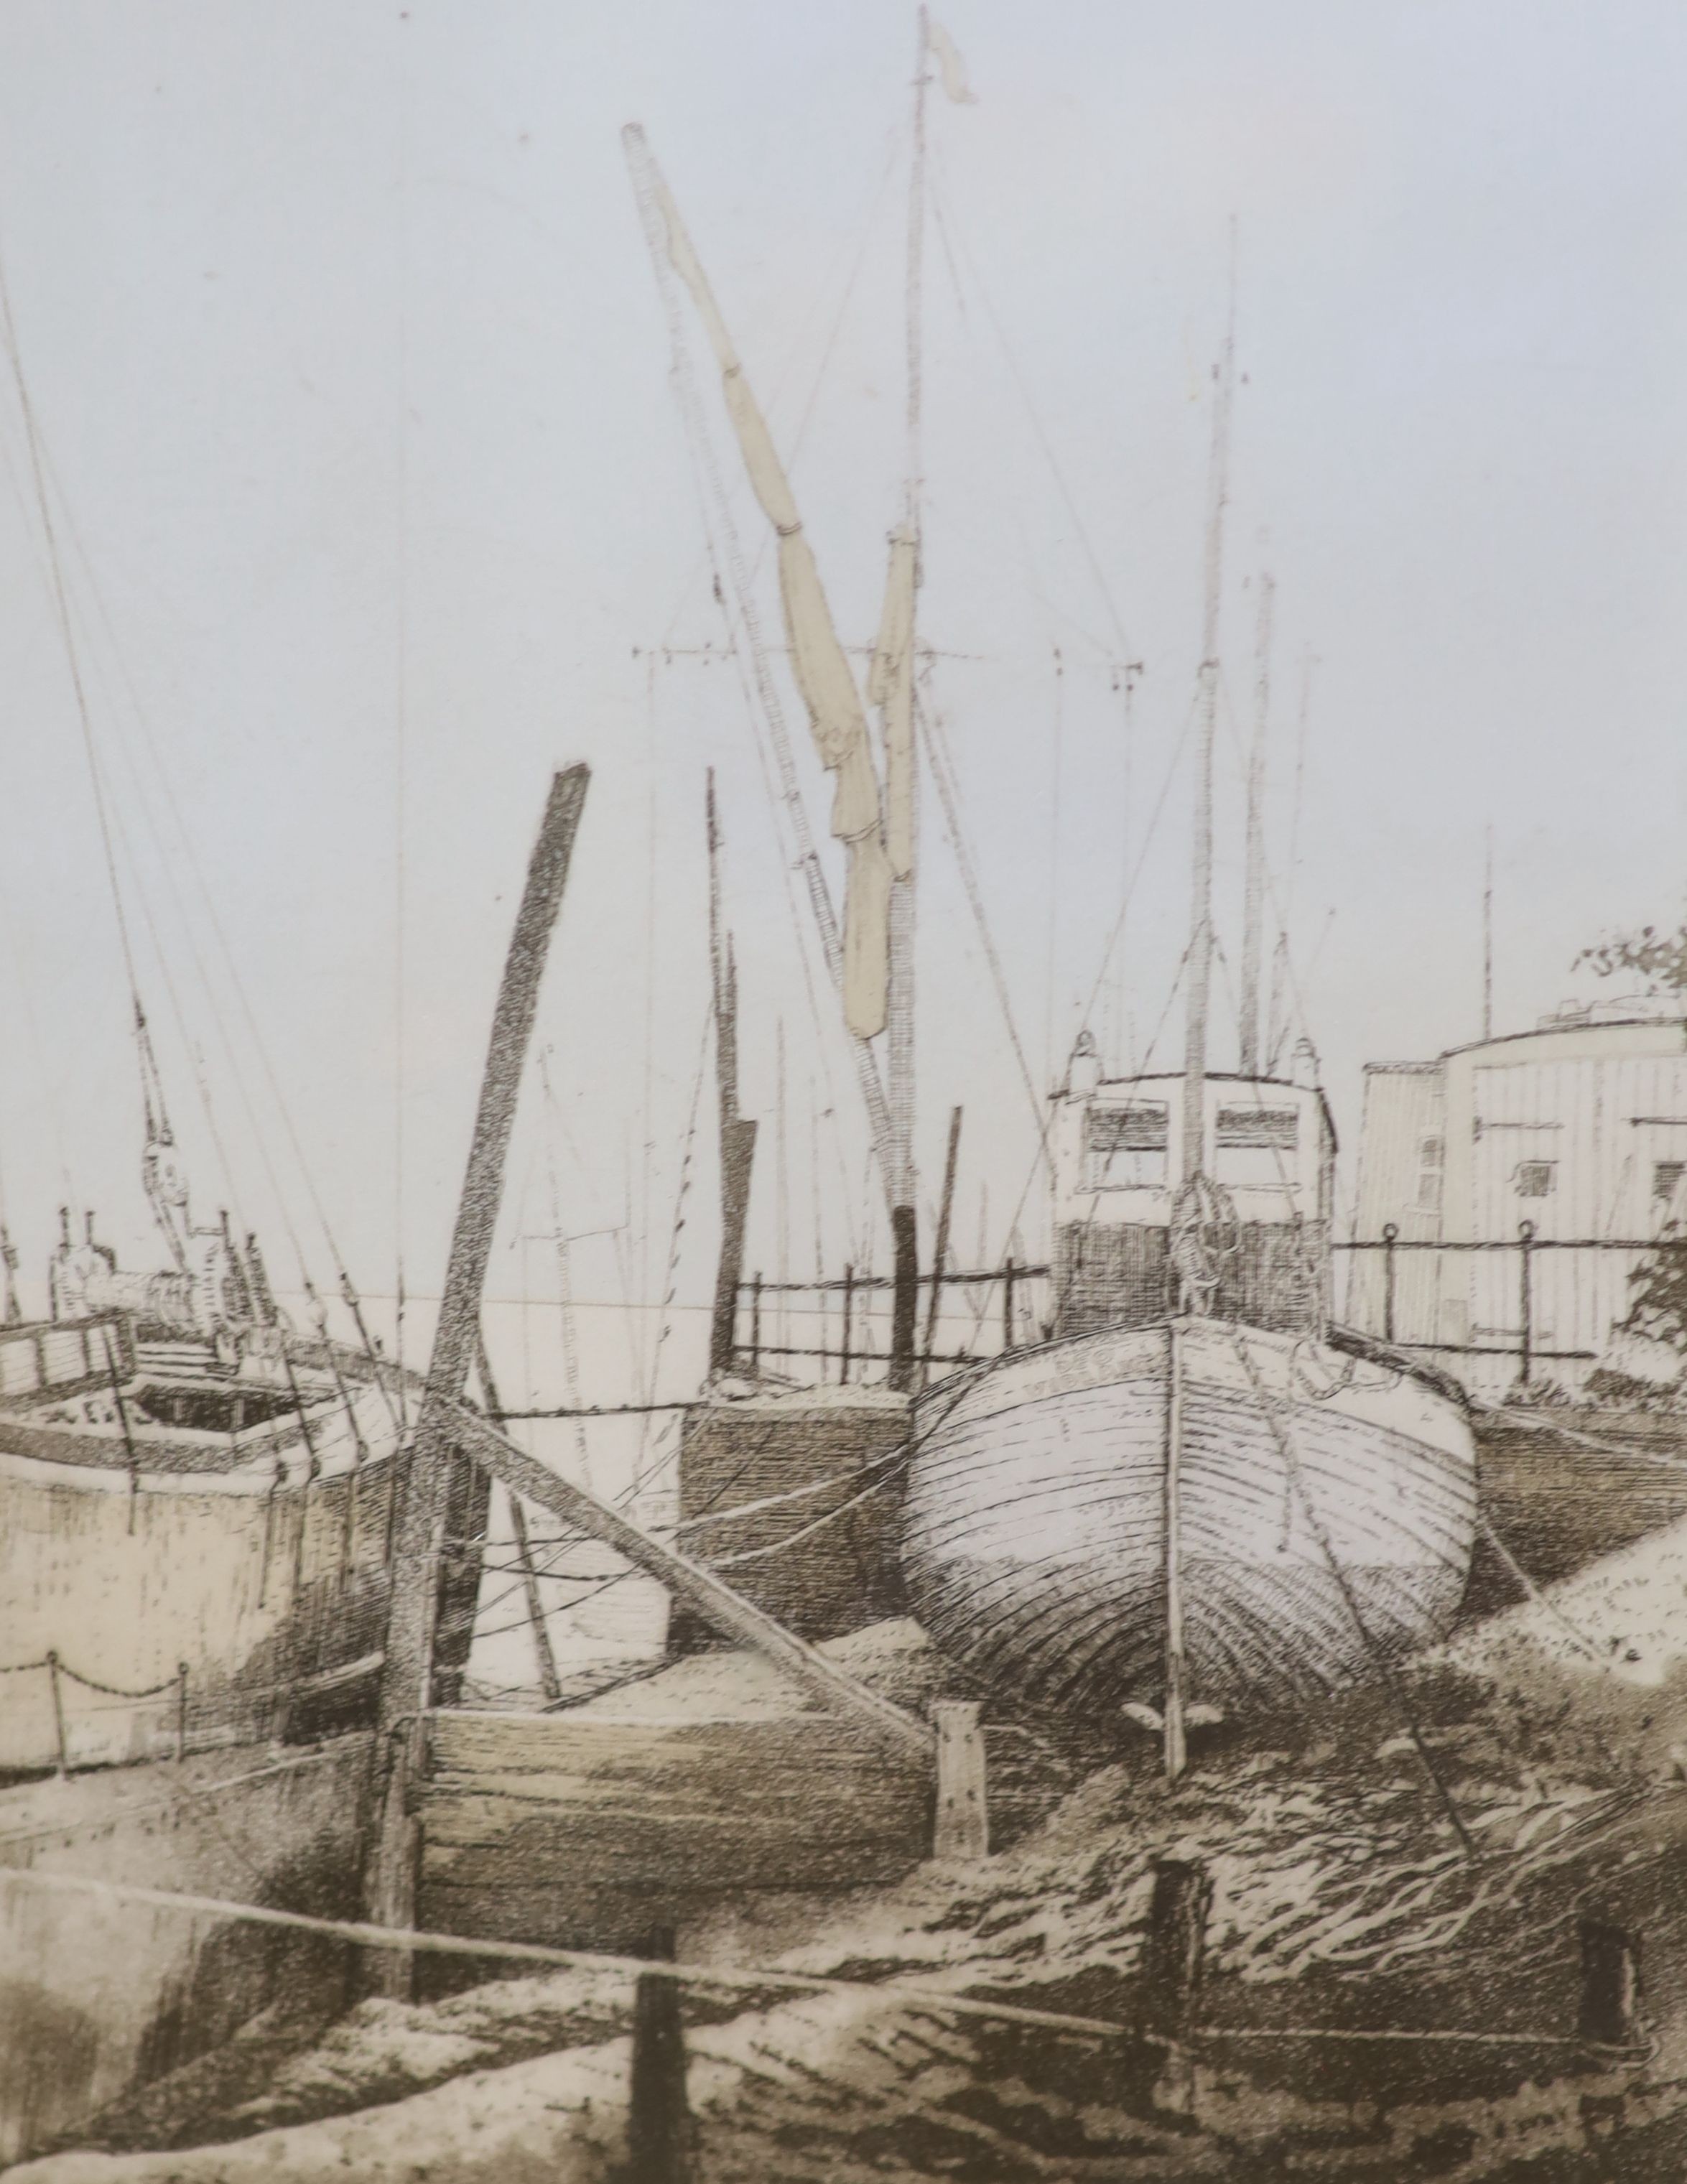 Michael Chaplin (b.1943), three coloured aquatints, 'Dolphin Yard', 'Iron Wharf' and 'Anglia', all signed in pencil, largest 36 x 47cm